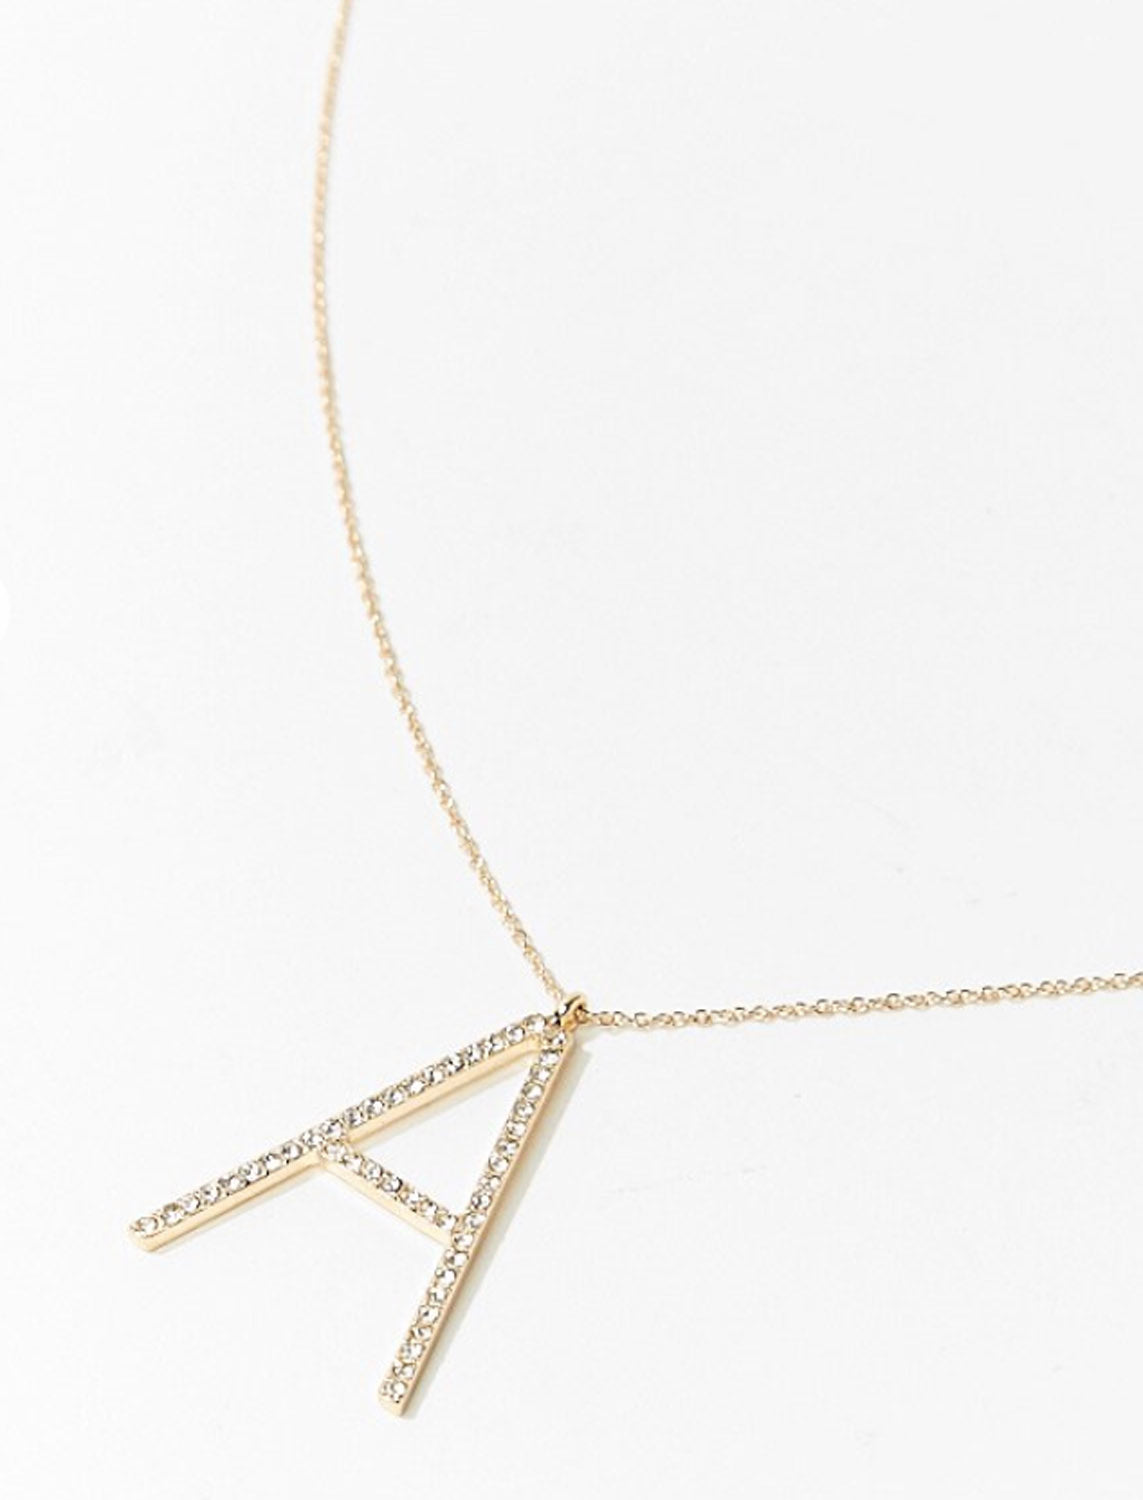 Rhinestone necklace shown with letter A